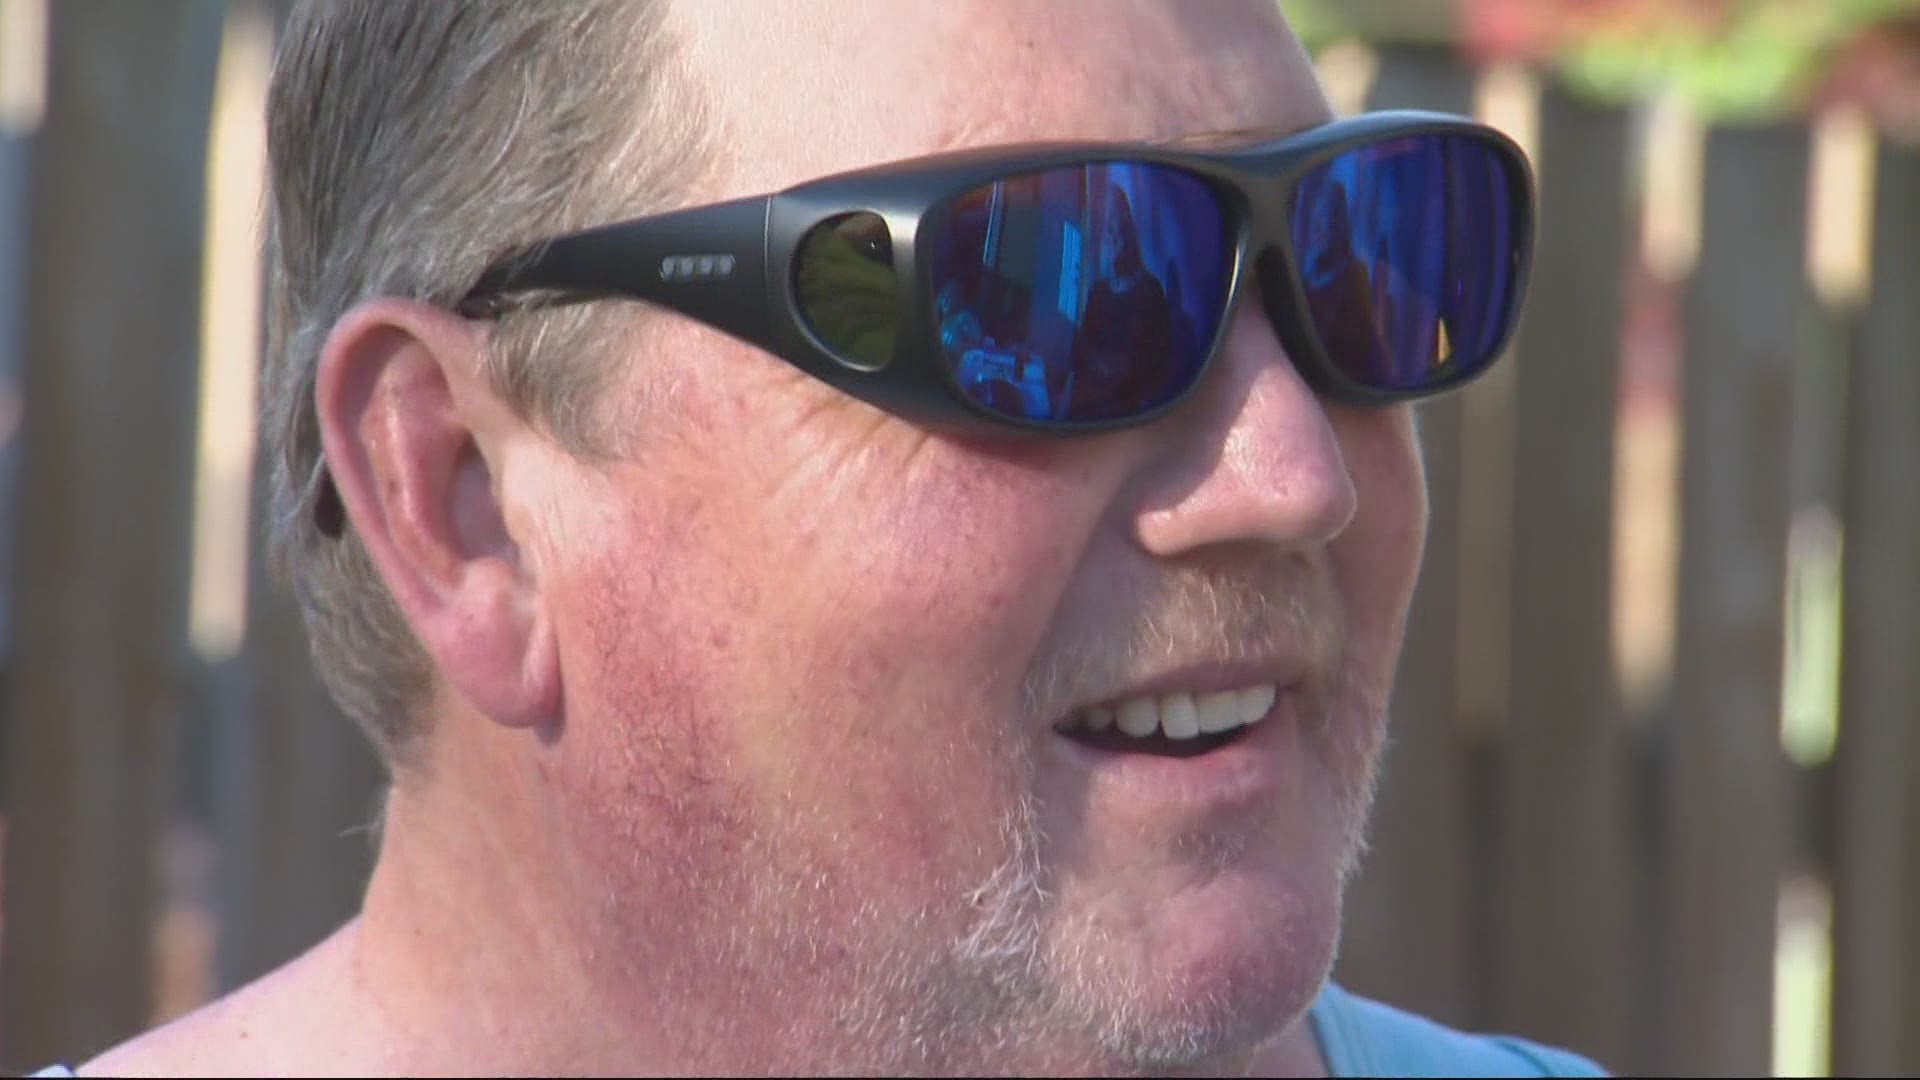 Family surprises color blind dad in Camas with corrective glasses